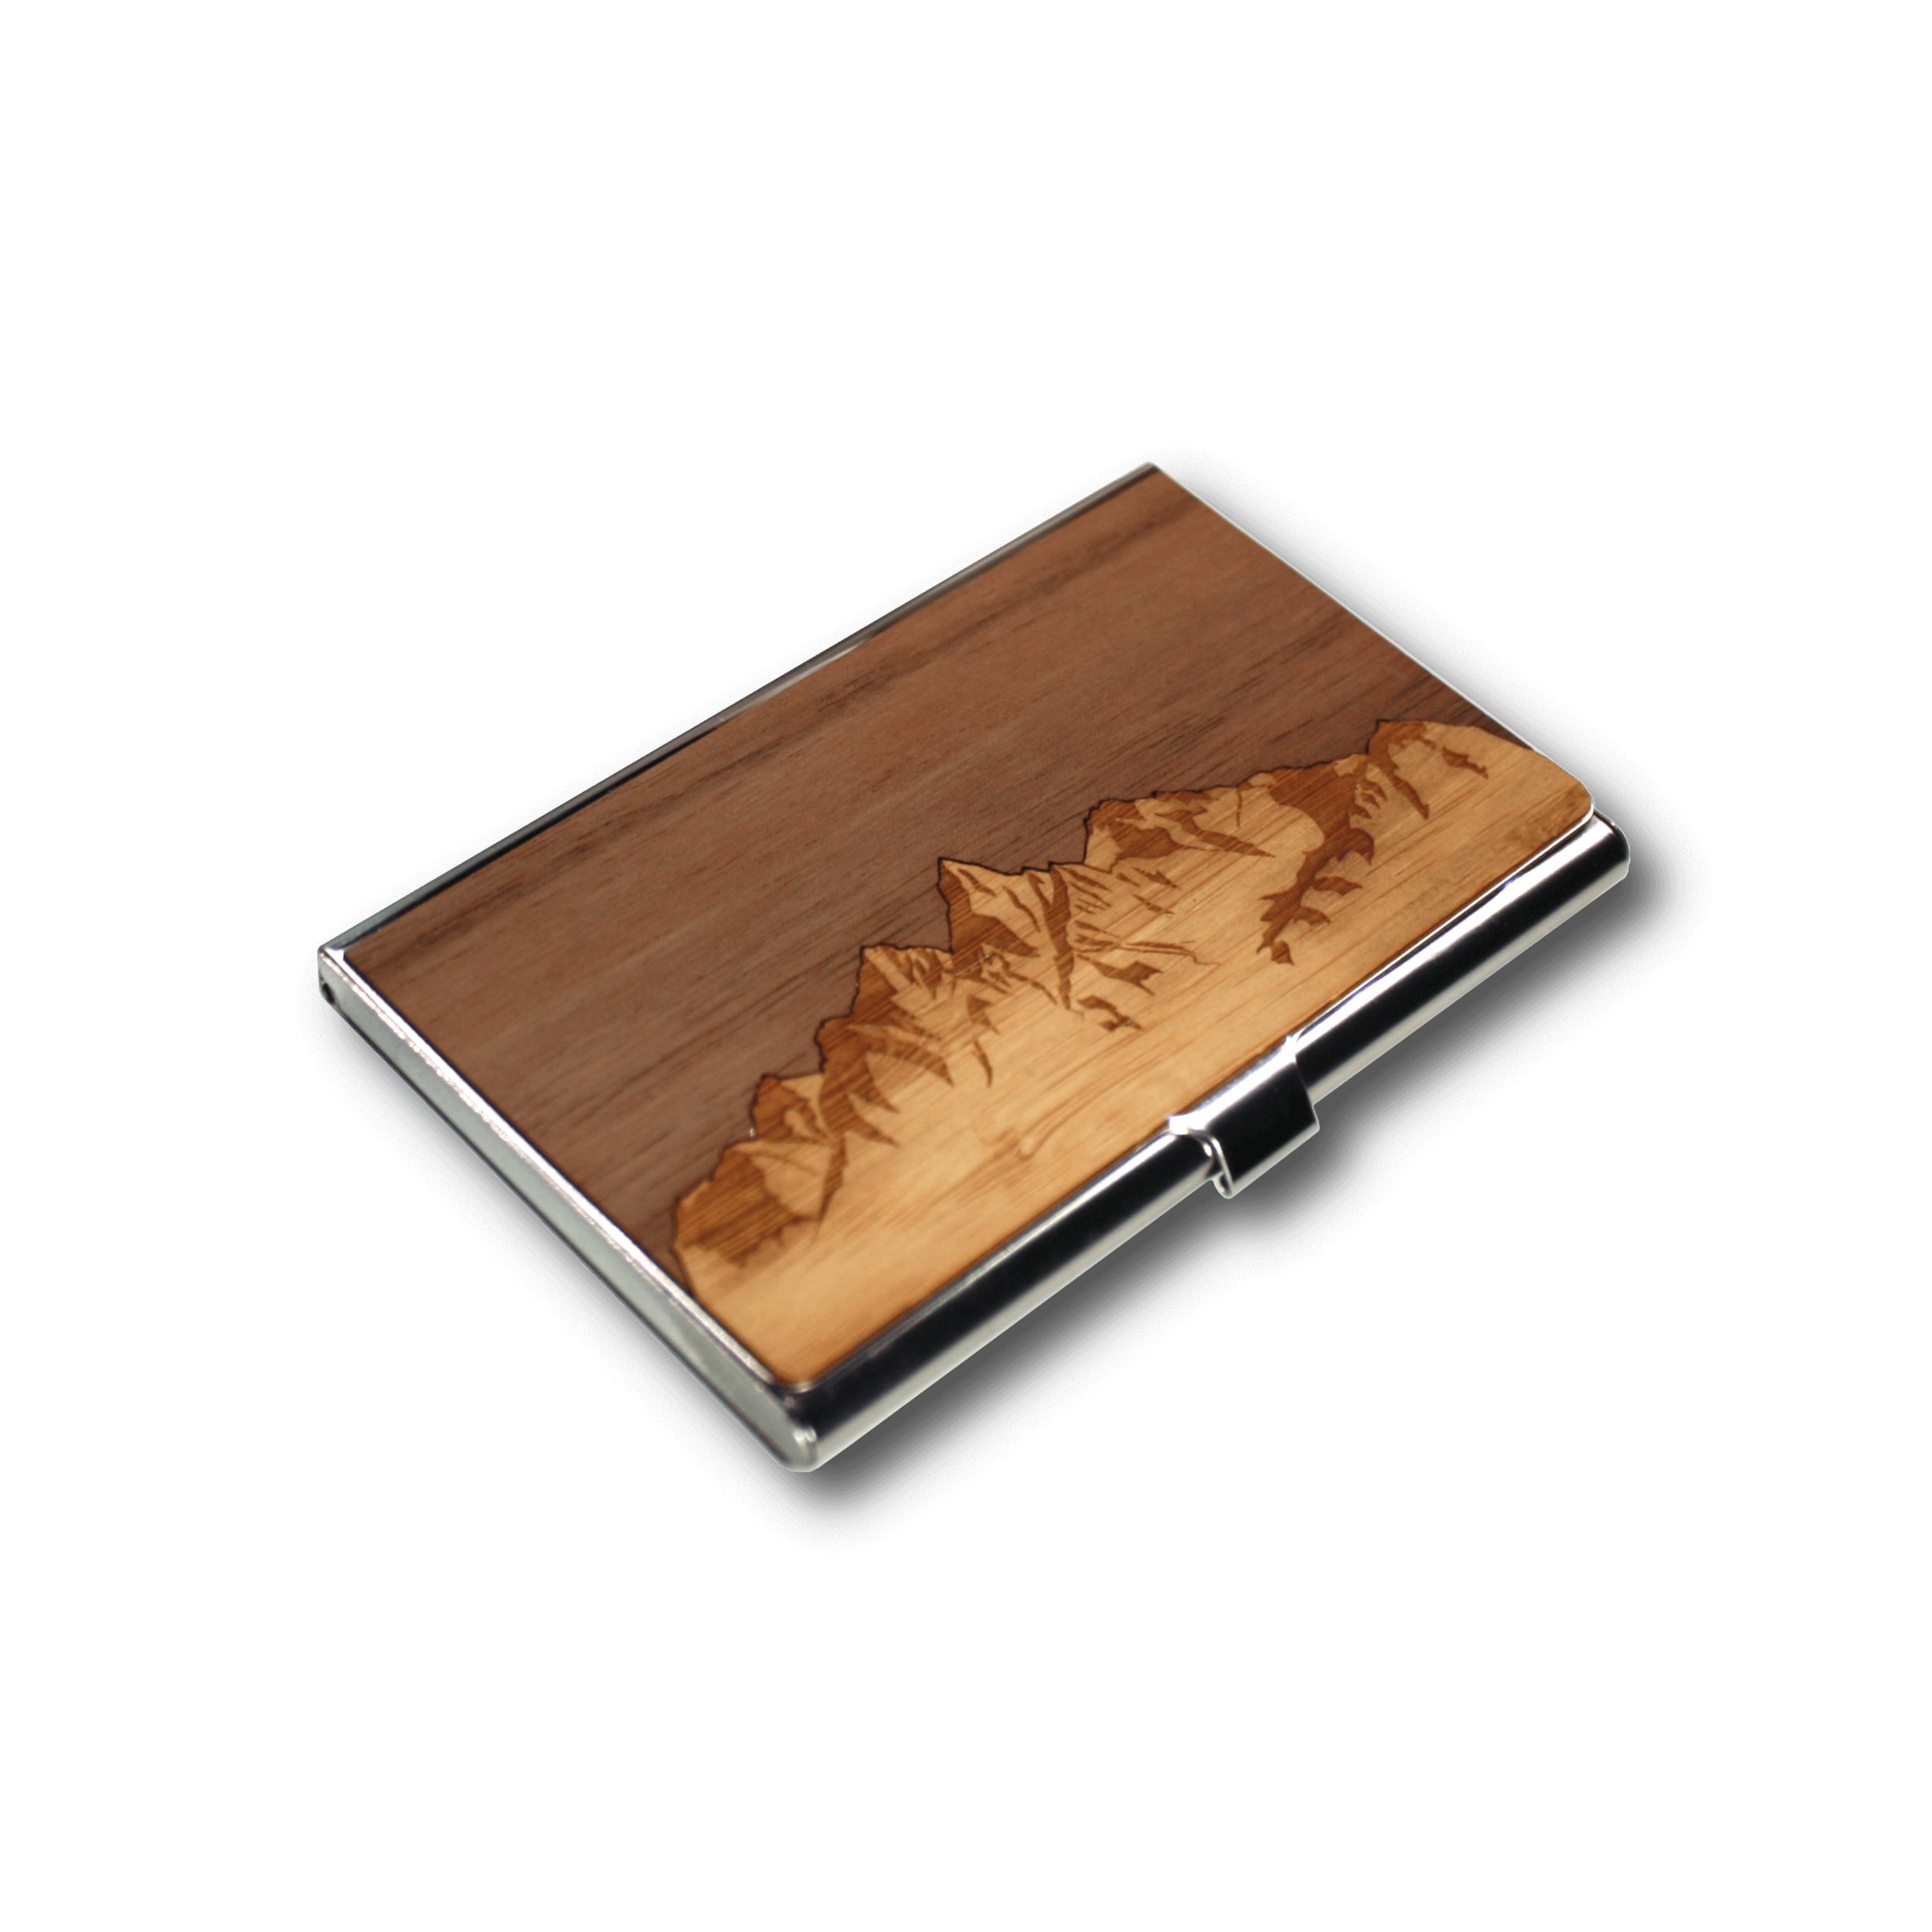 Handmade Wooden Business Card Holder, Home and Office - WUDN